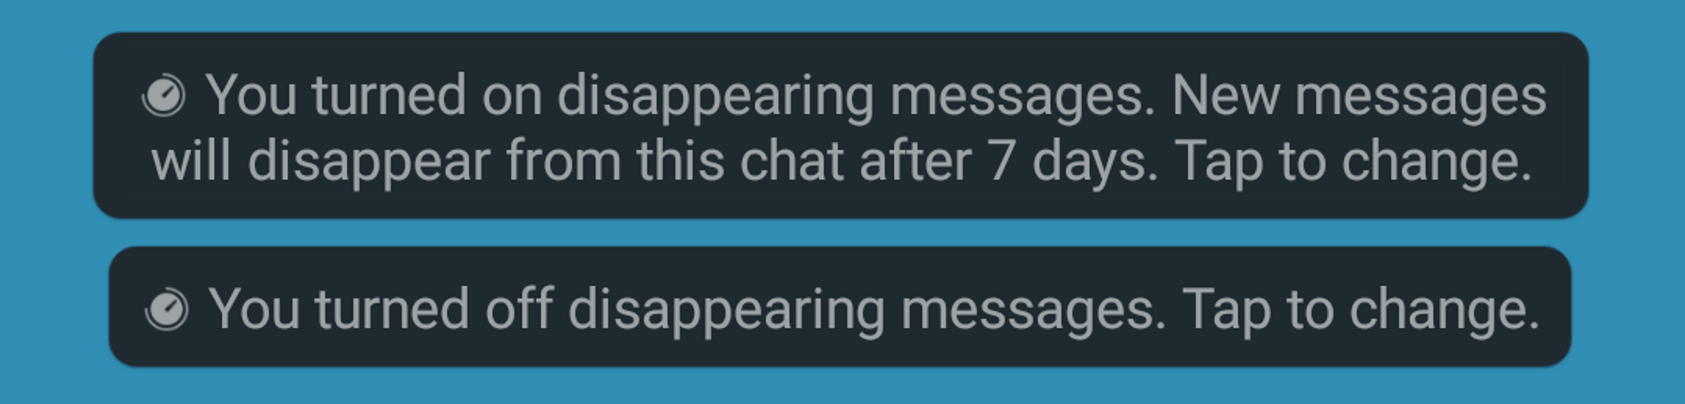 Turning off disappearing messages notification